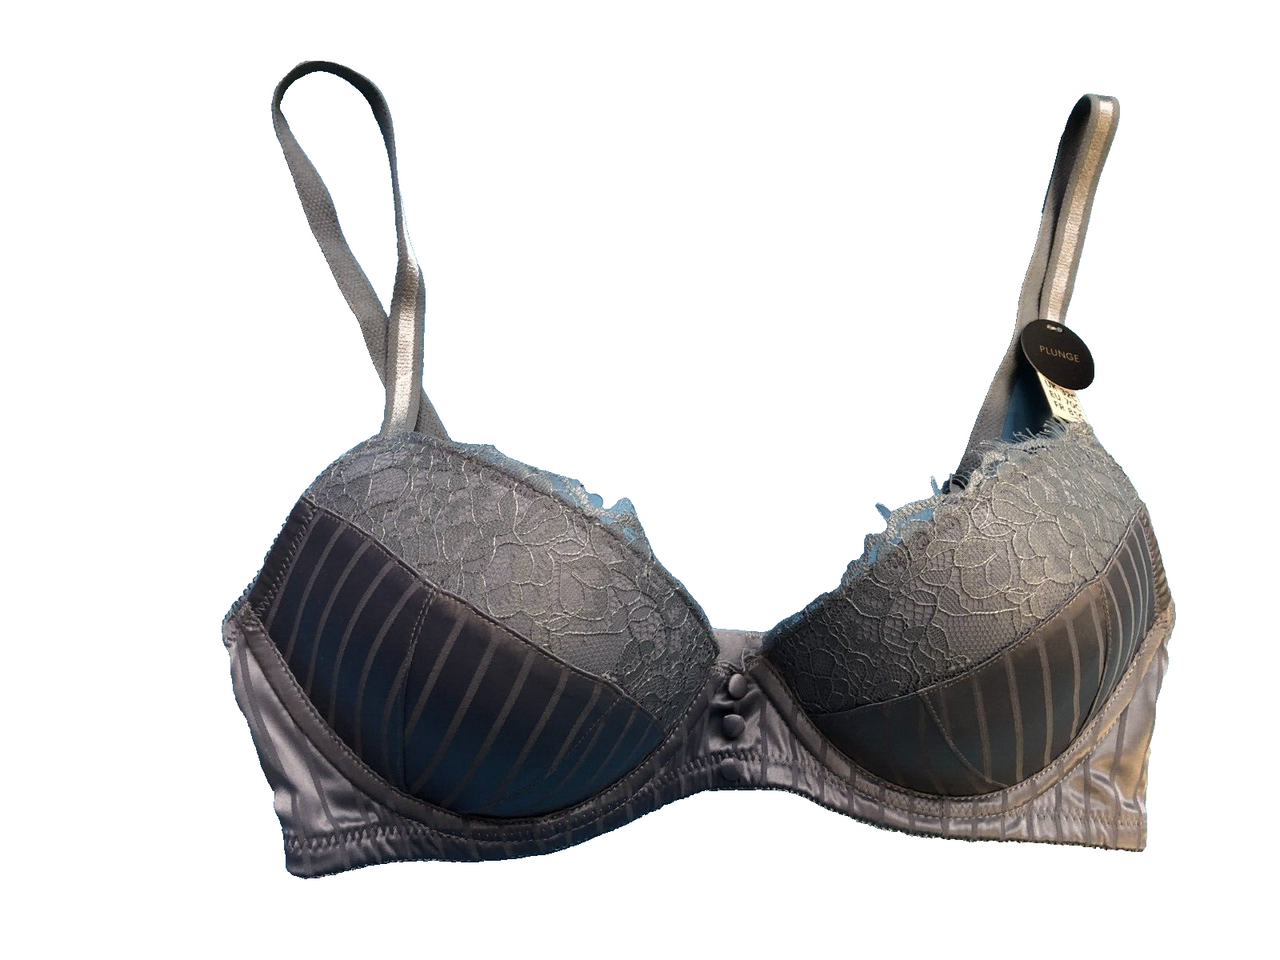 New Look Bra 32C Metallic Grey Plunge Underwired Padded New with Tags